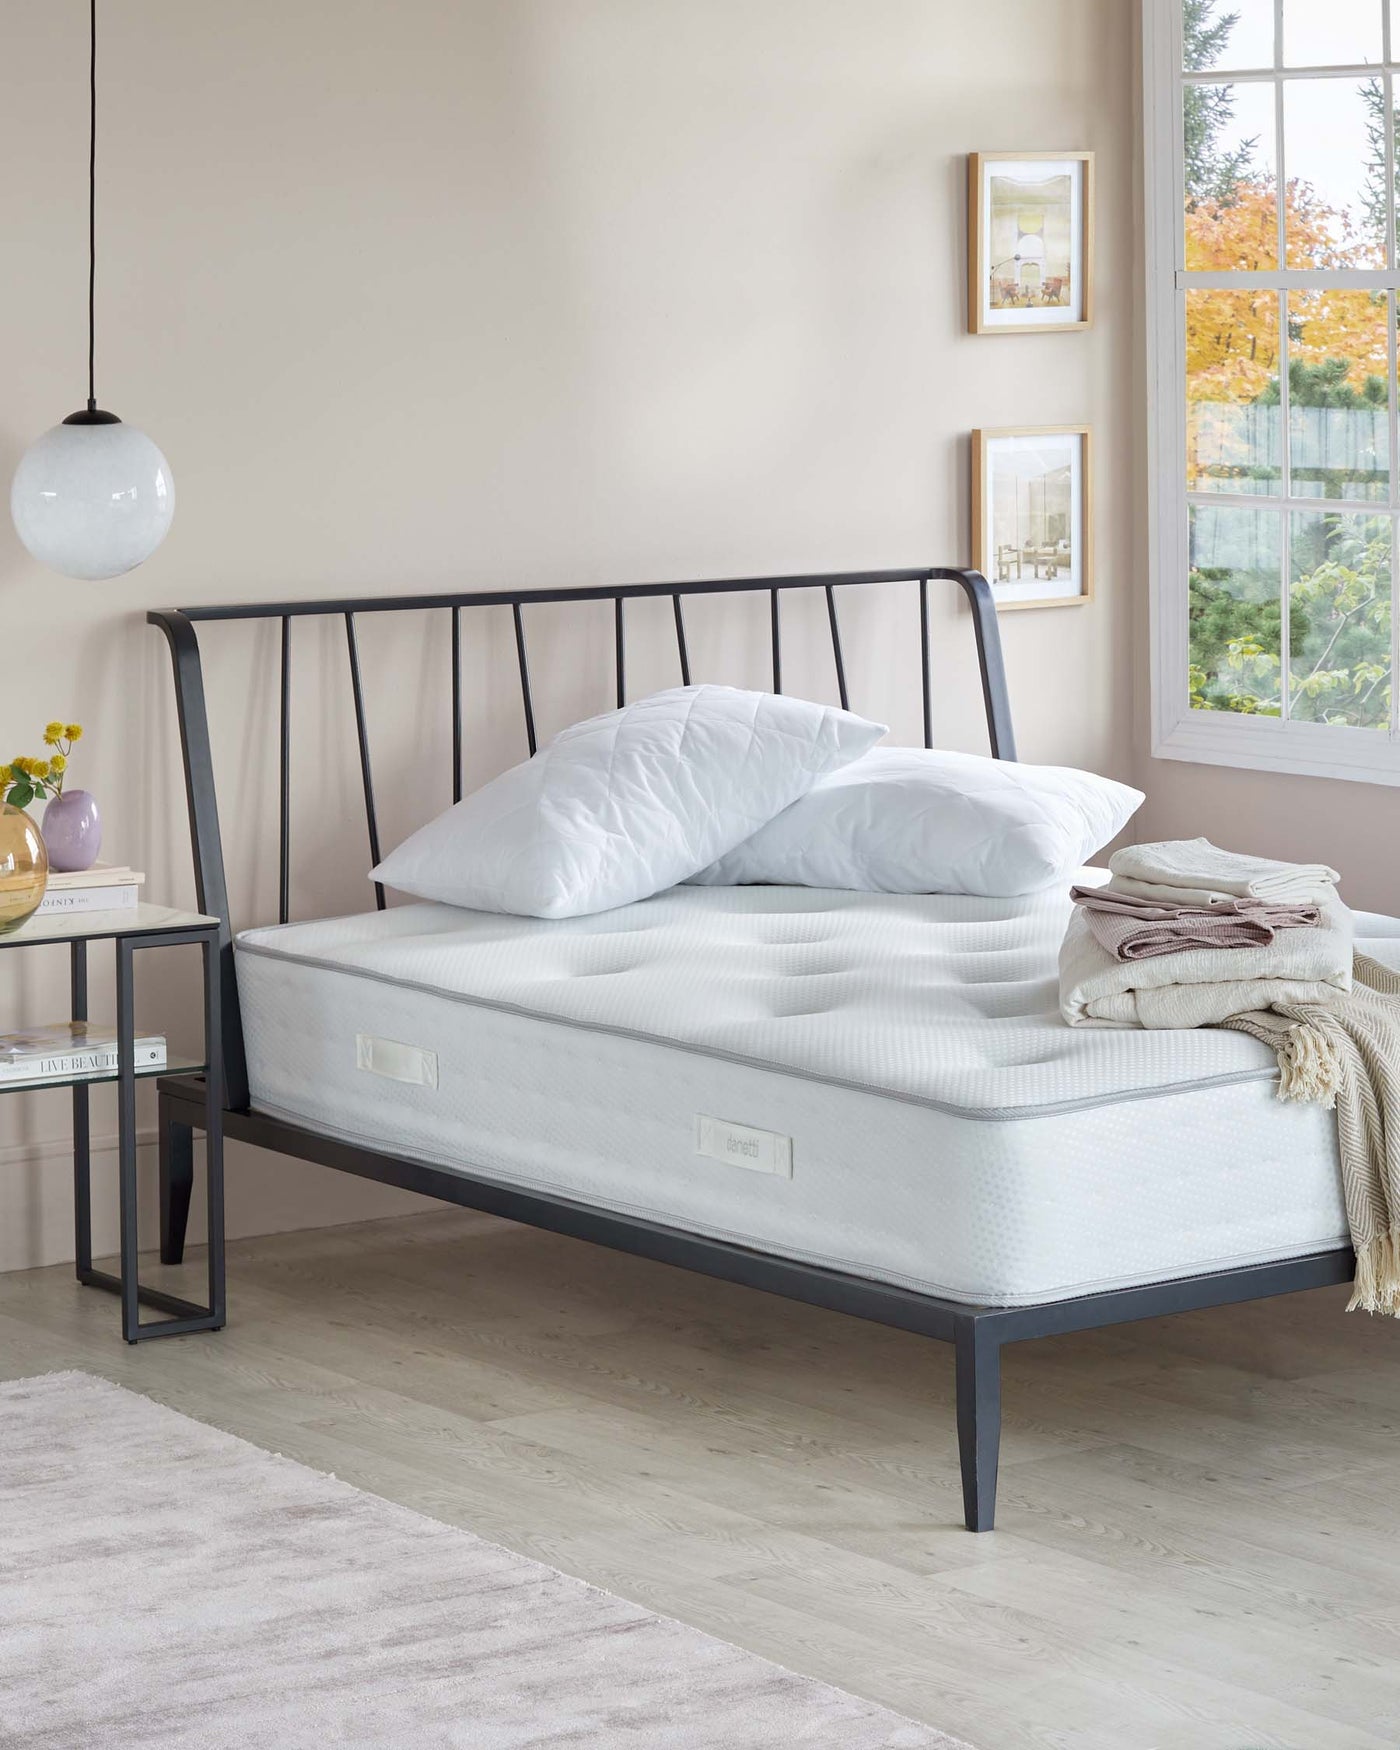 Elegant minimalist bedroom with a contemporary metal bed frame in black finish and a comfortable white mattress. Beside the bed is a modern black metal side table with a simple square design, displaying books and decorative items.